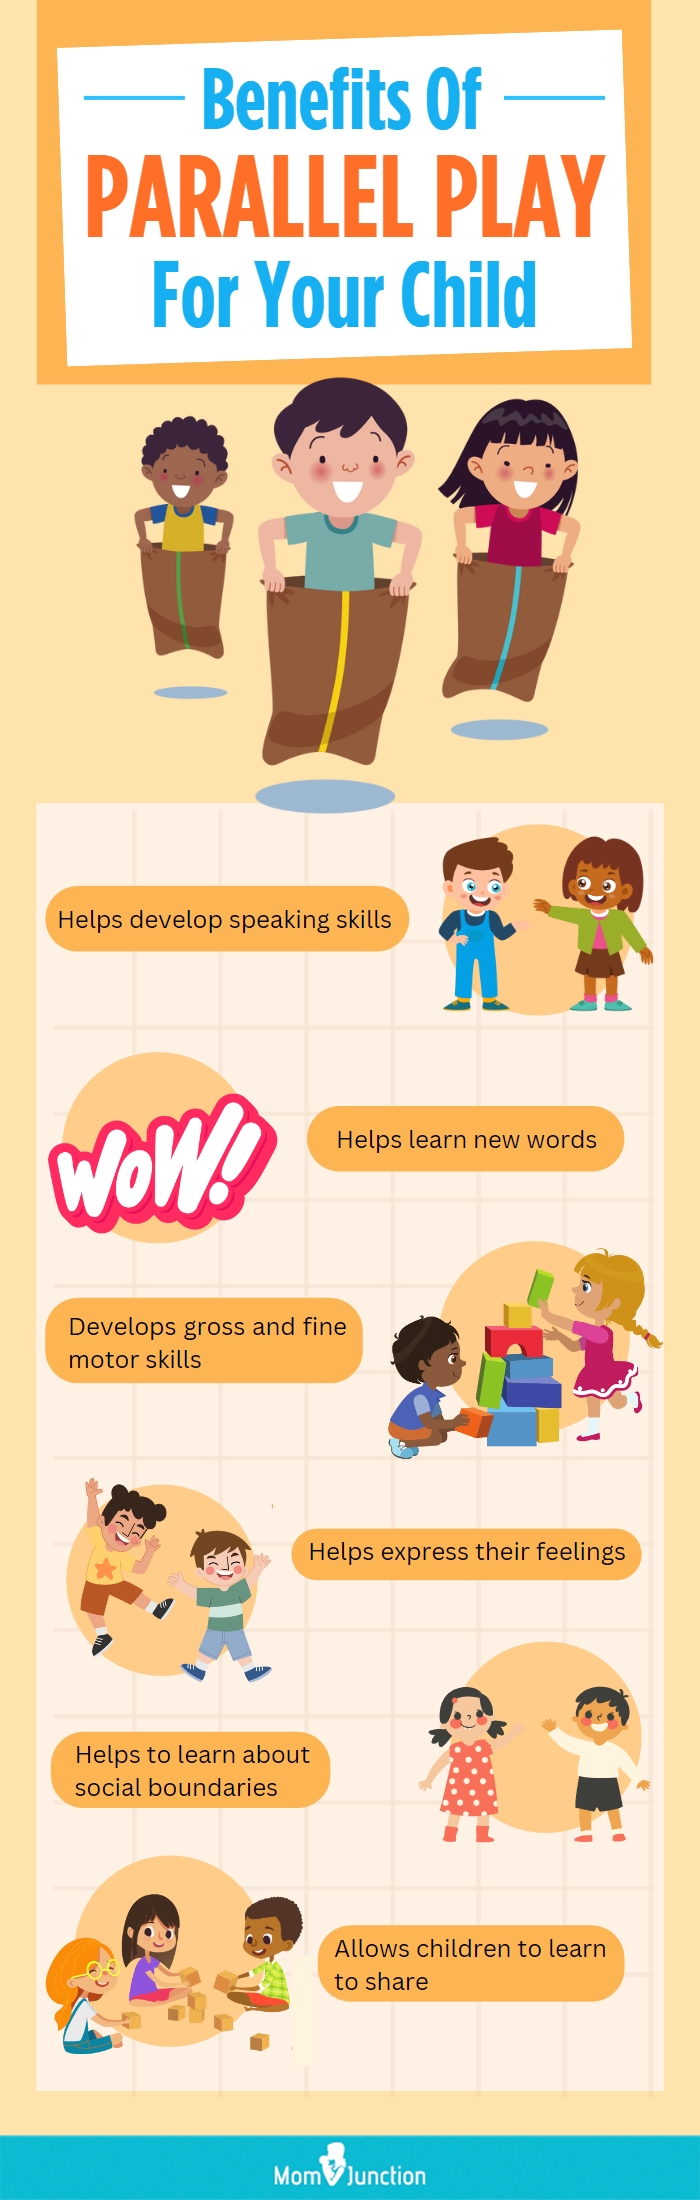 benefits of parallel play for your child (infographic)